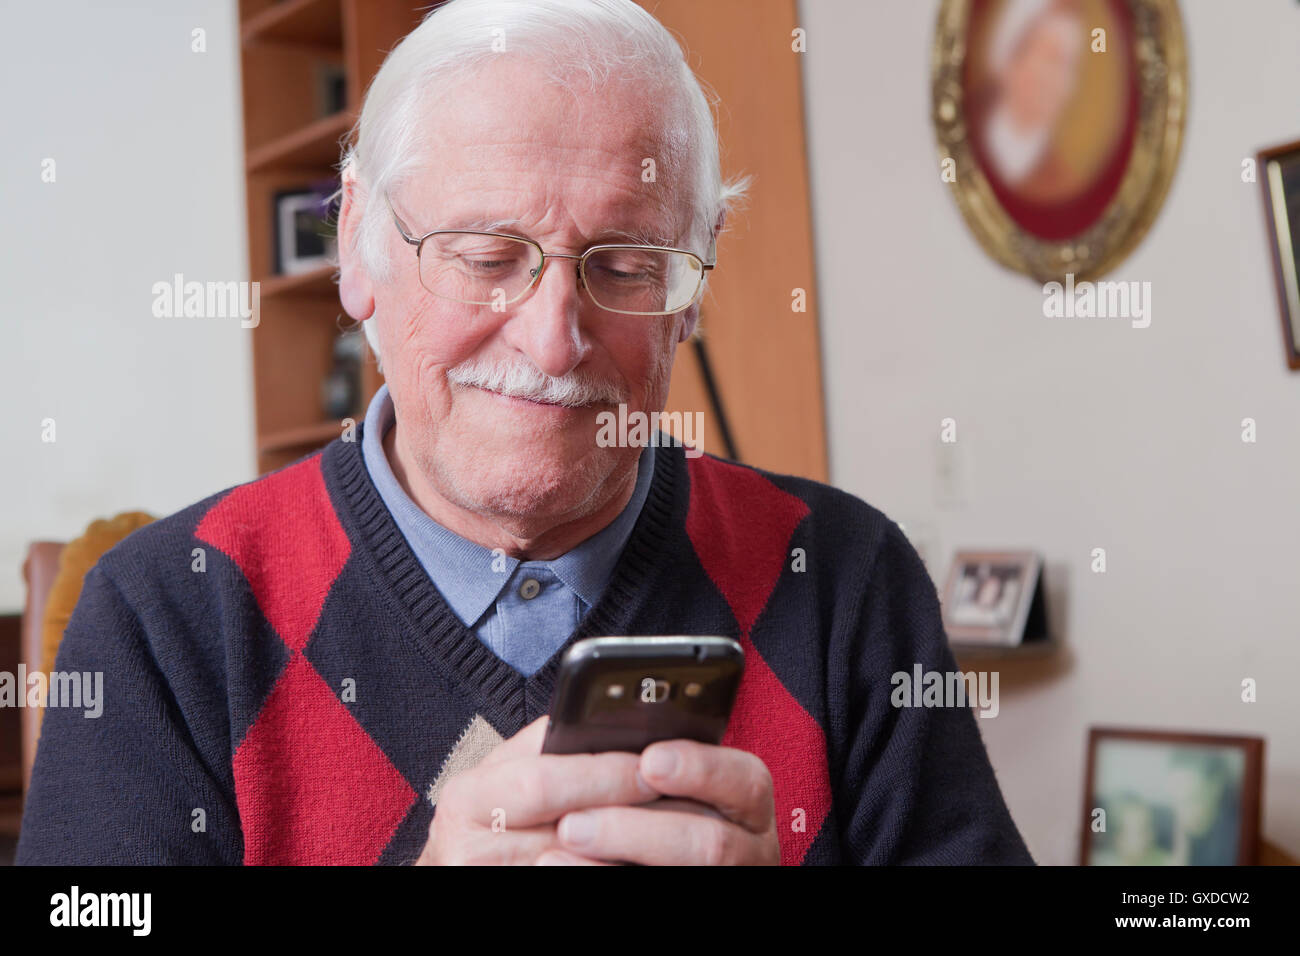 Senior man using mobile phone at home Banque D'Images